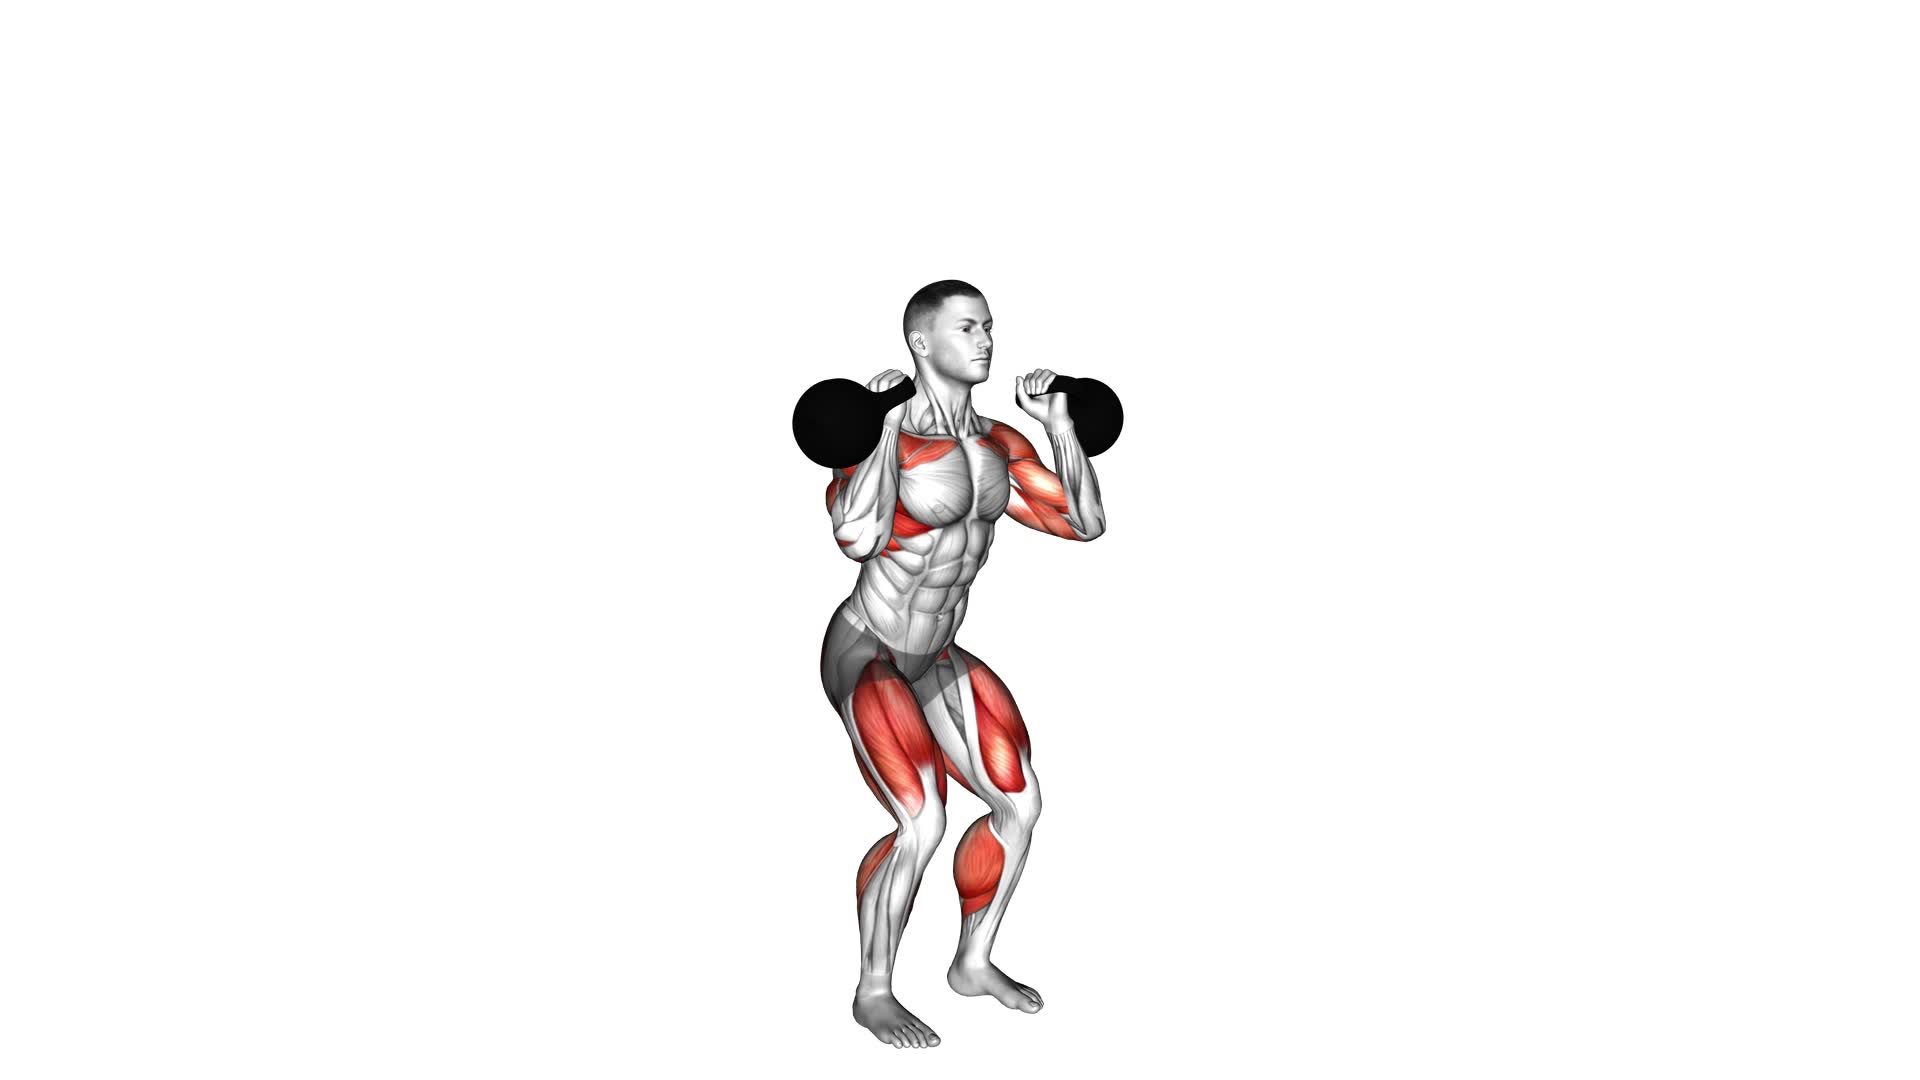 Kettlebell Clean and Jerk - Video Exercise Guide & Tips